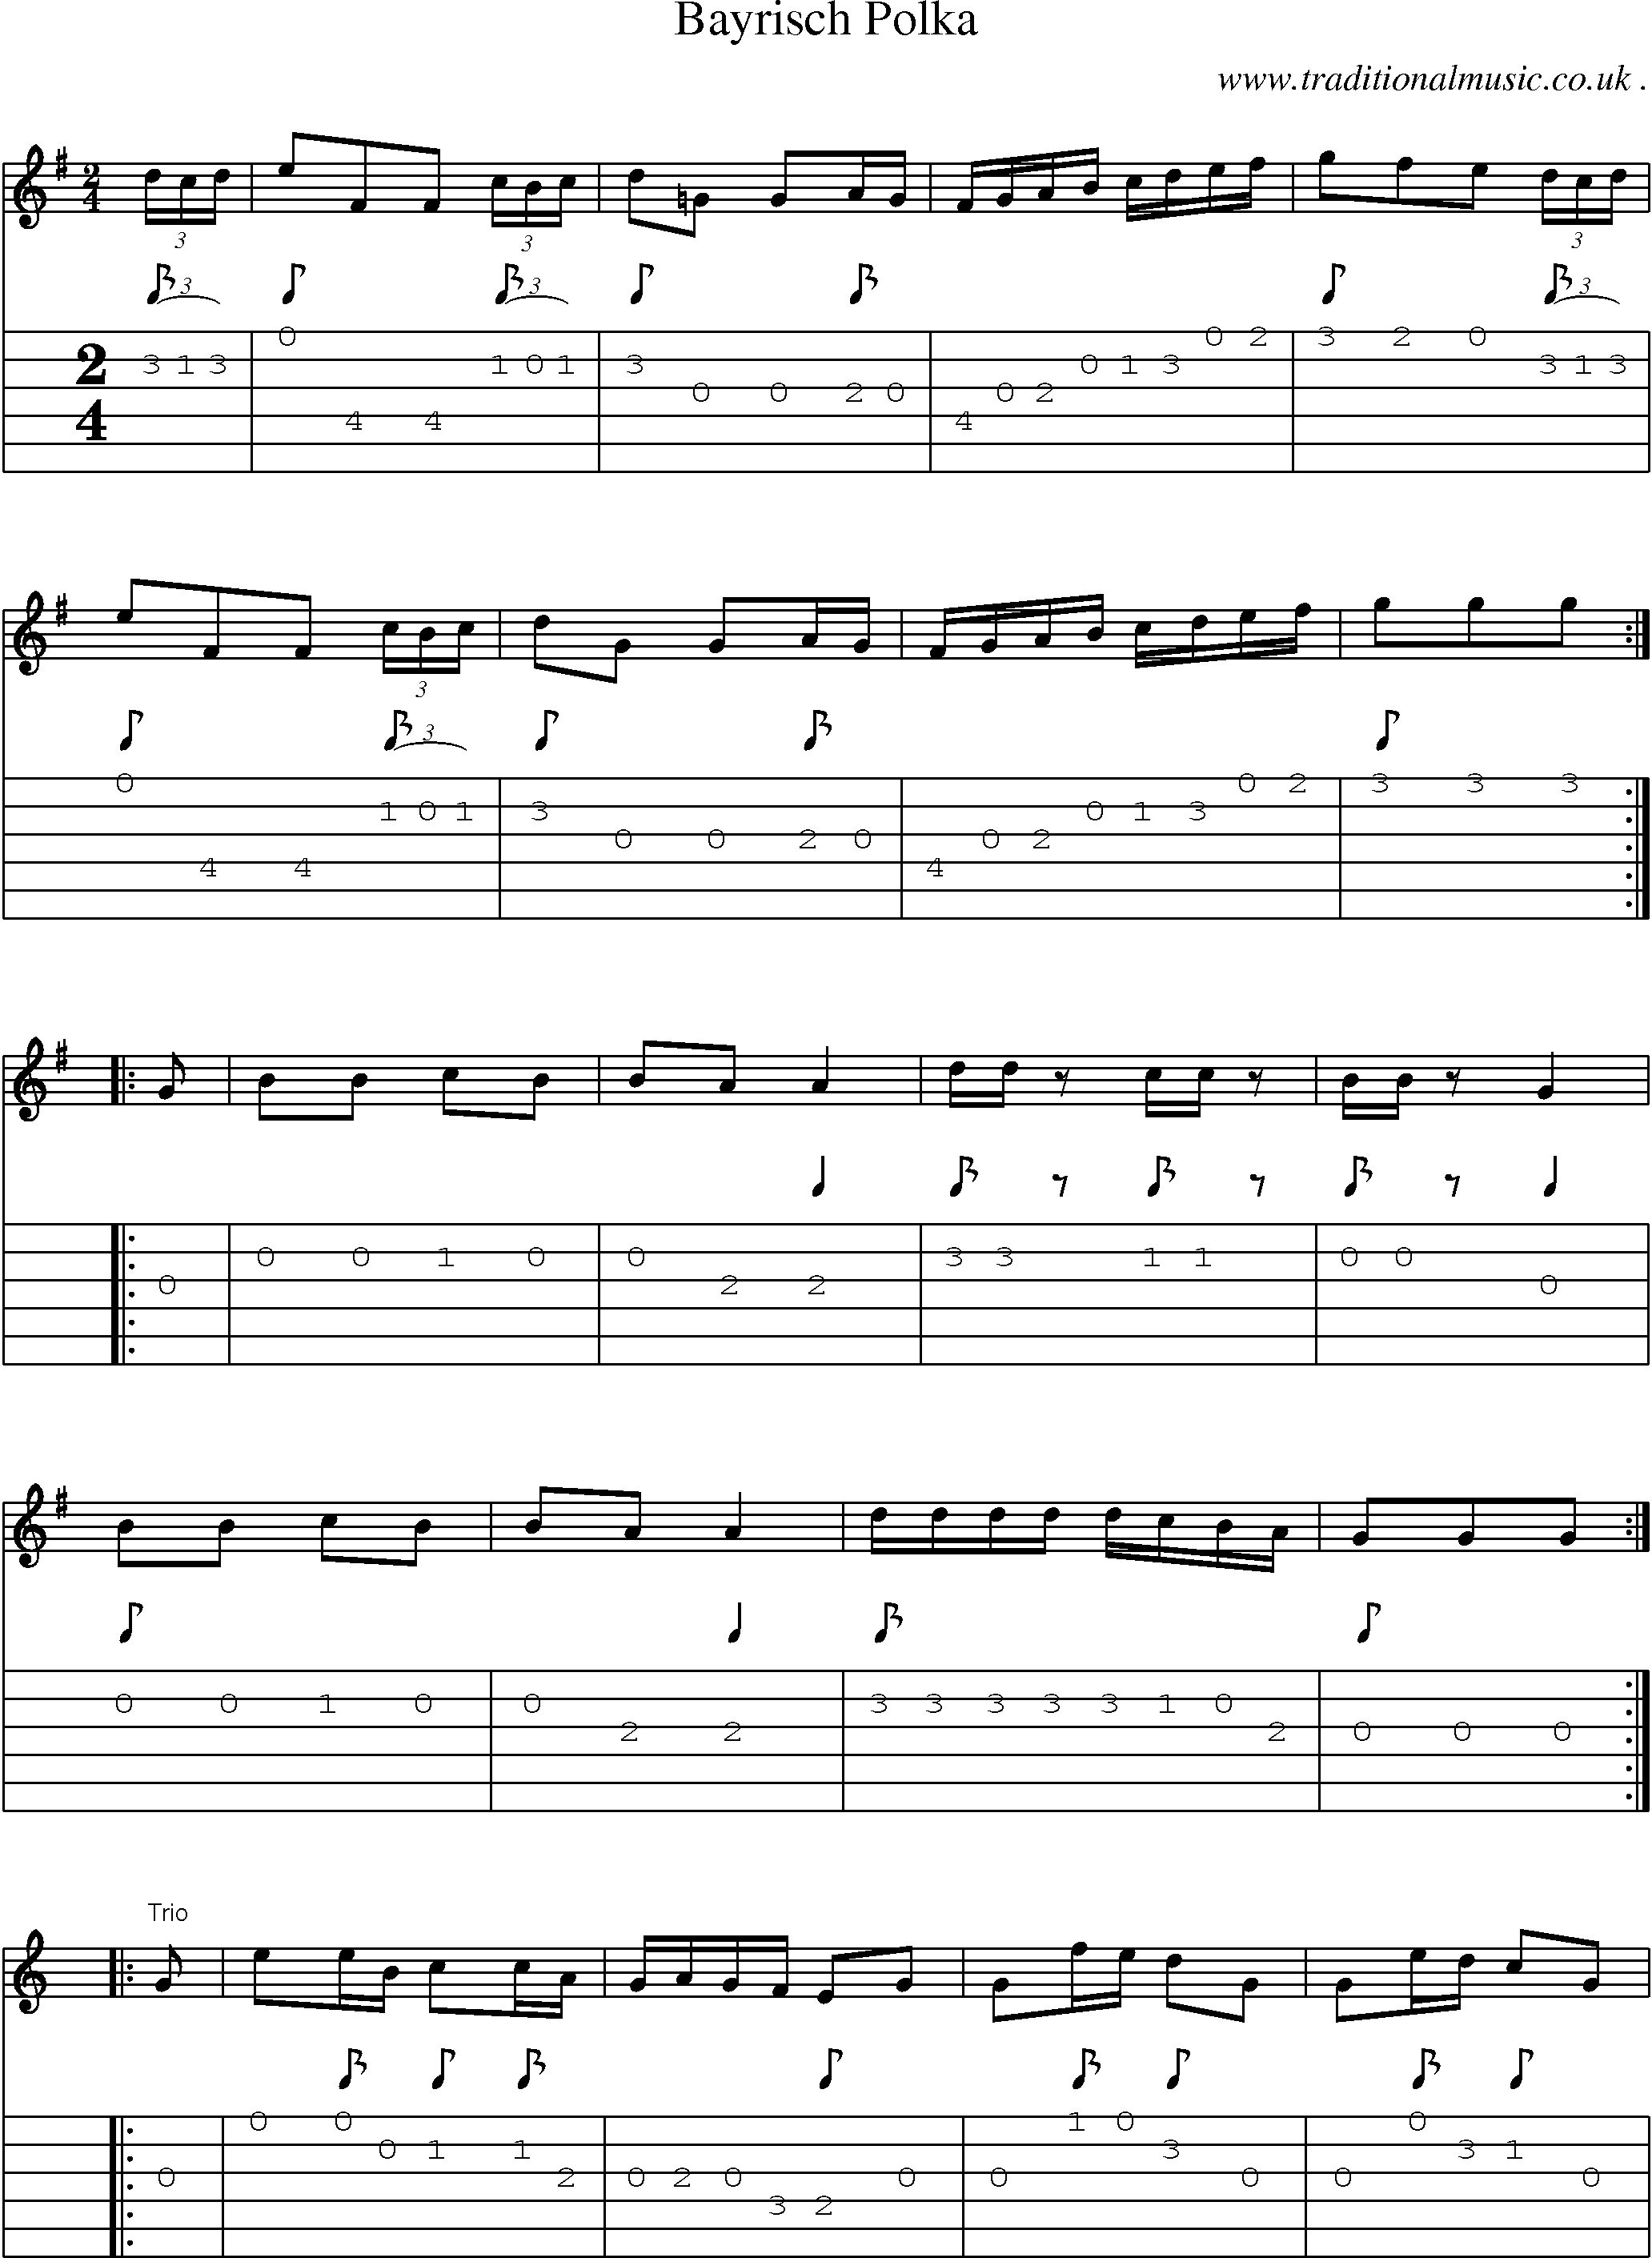 Sheet-Music and Guitar Tabs for Bayrisch Polka